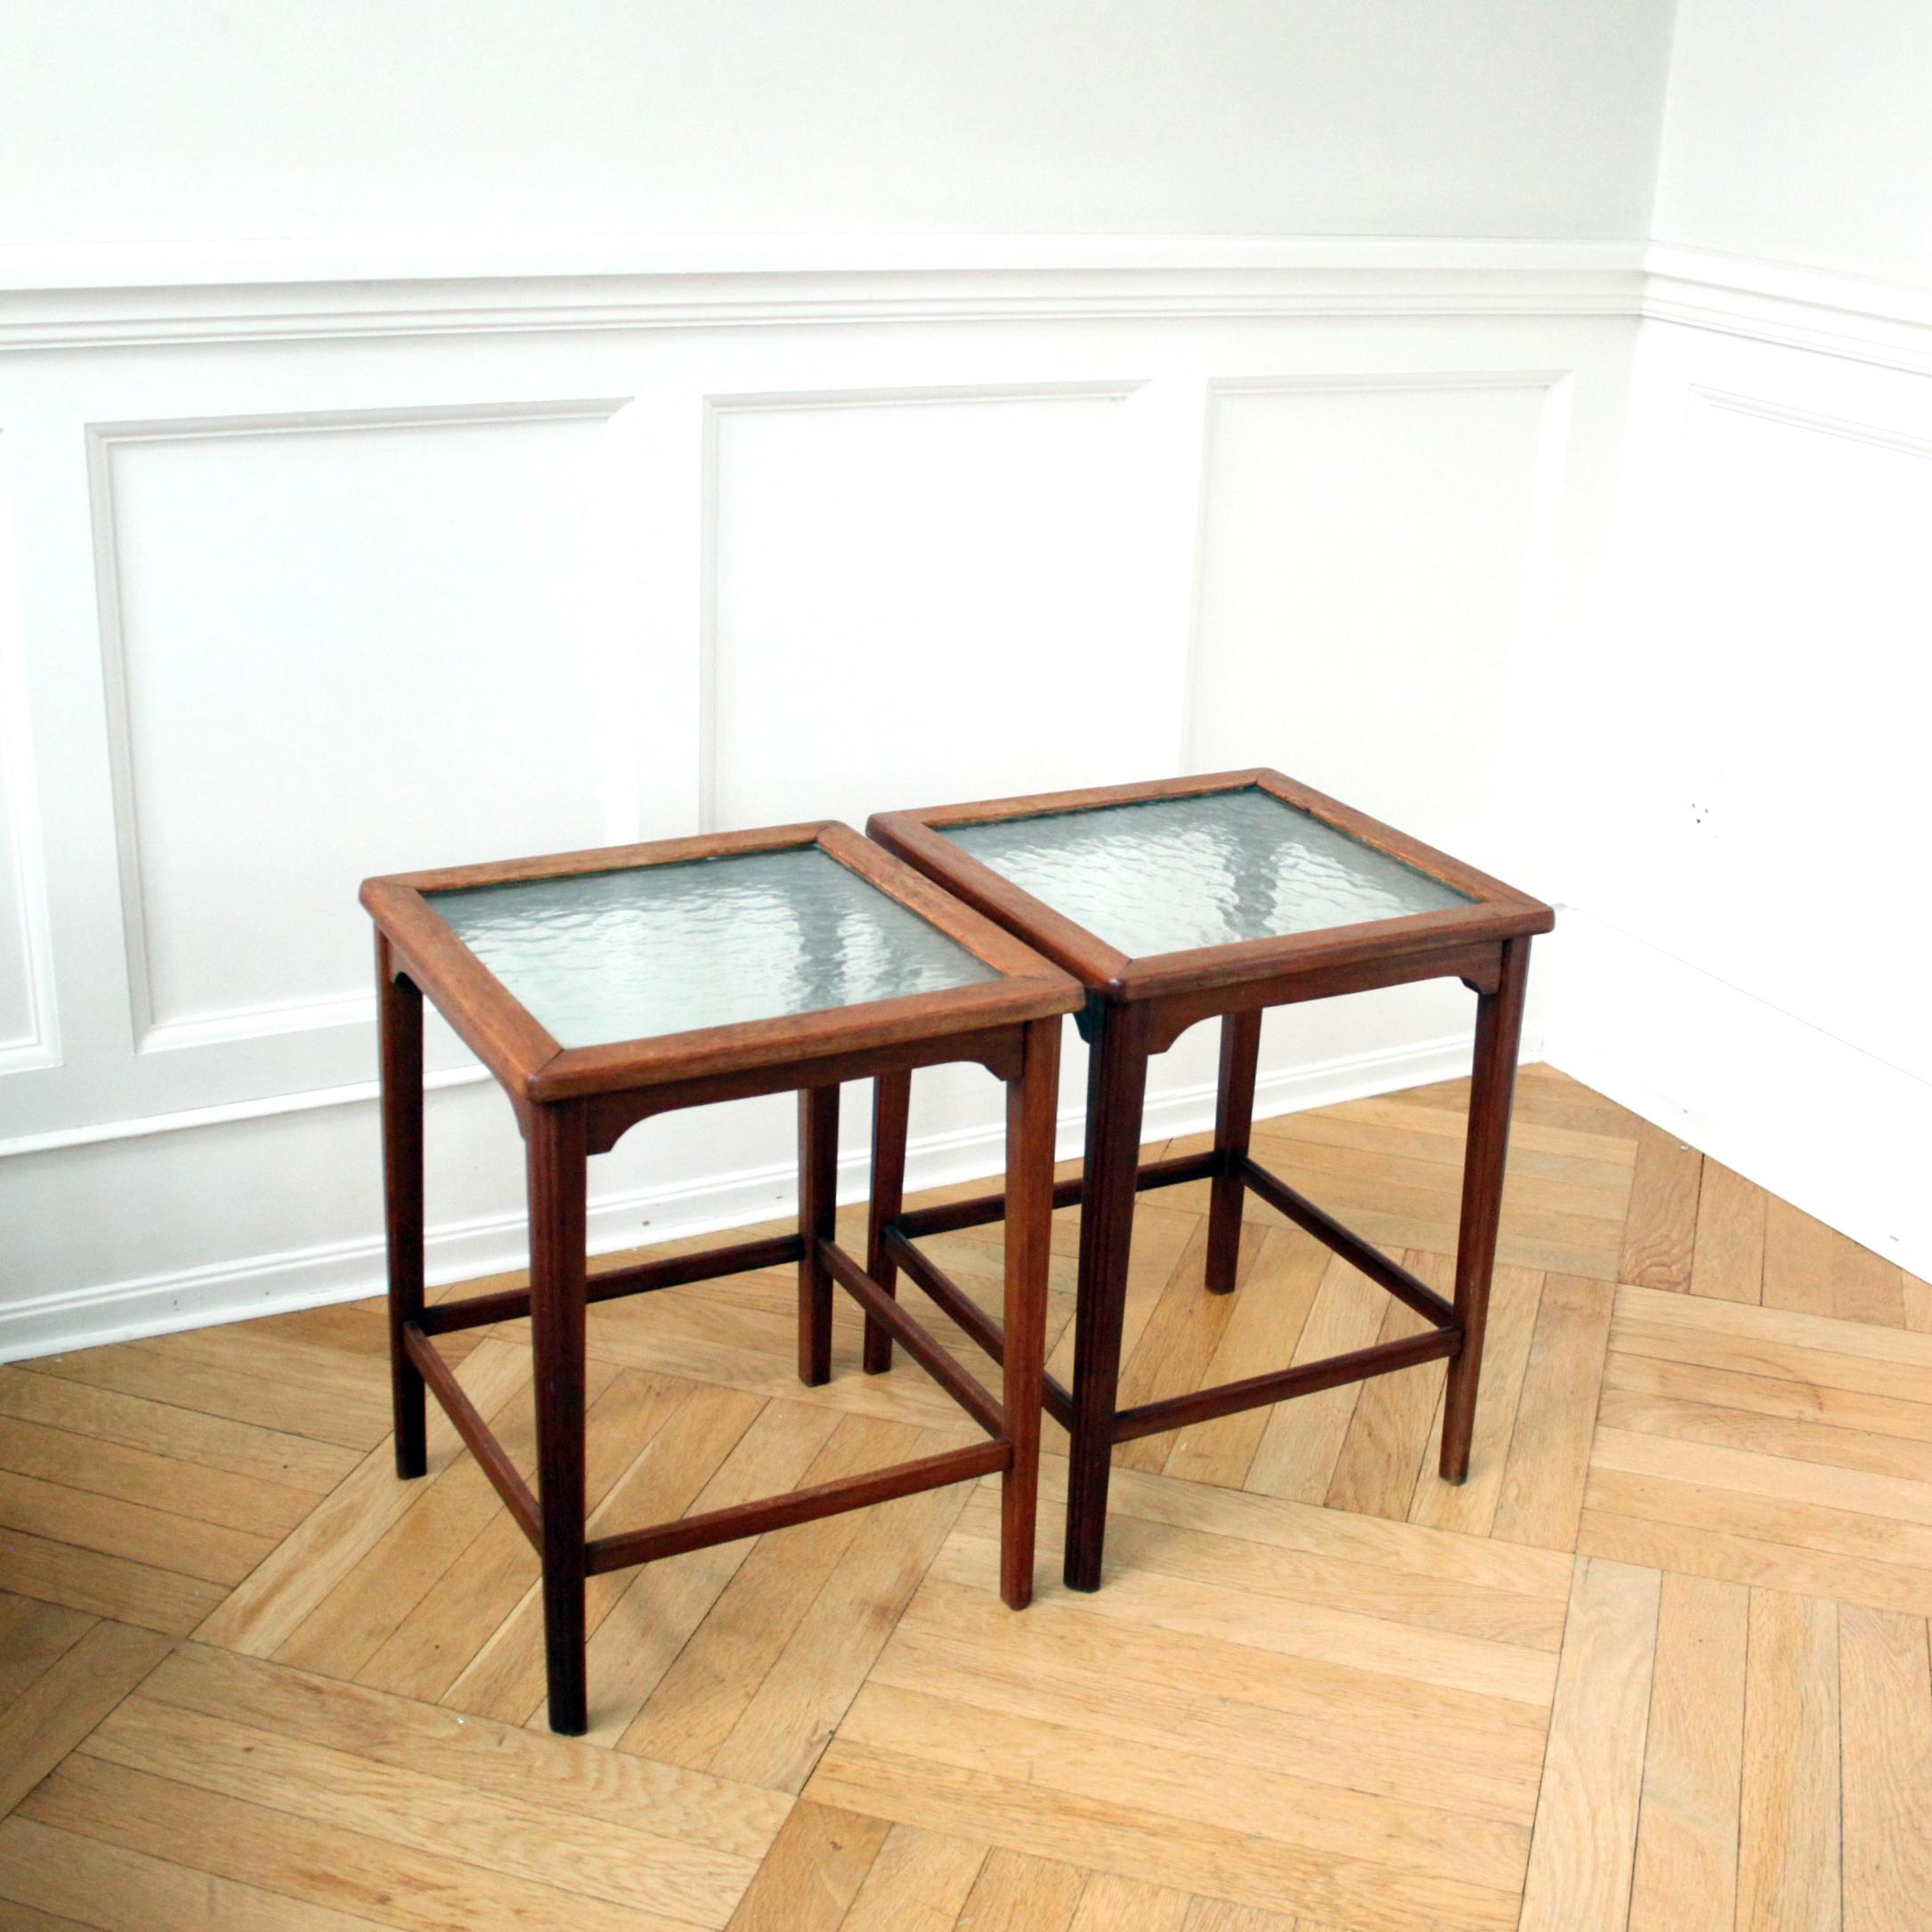 Oiled Pair of Scandinavian Modern Side Tables, Mahogany and Decorative Glass, 1940s  For Sale